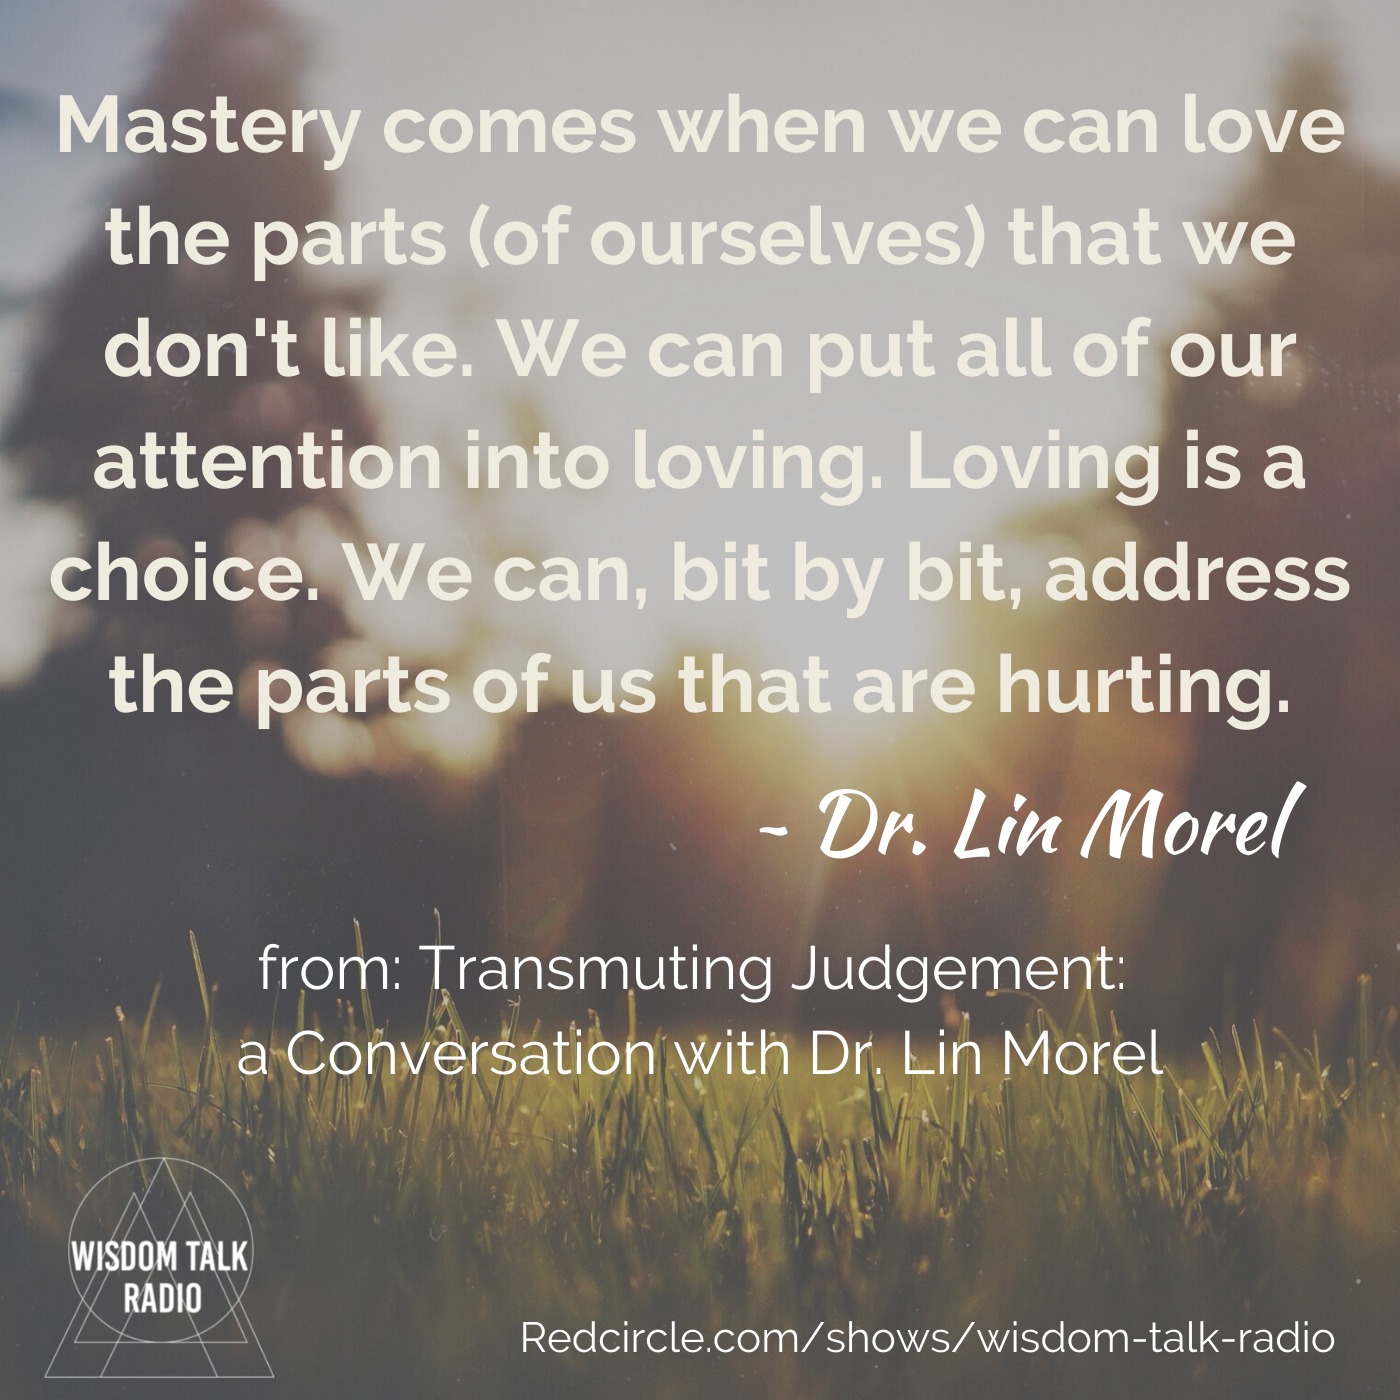 Transmuting Judgement: a Conversation with Dr. Lin Morel